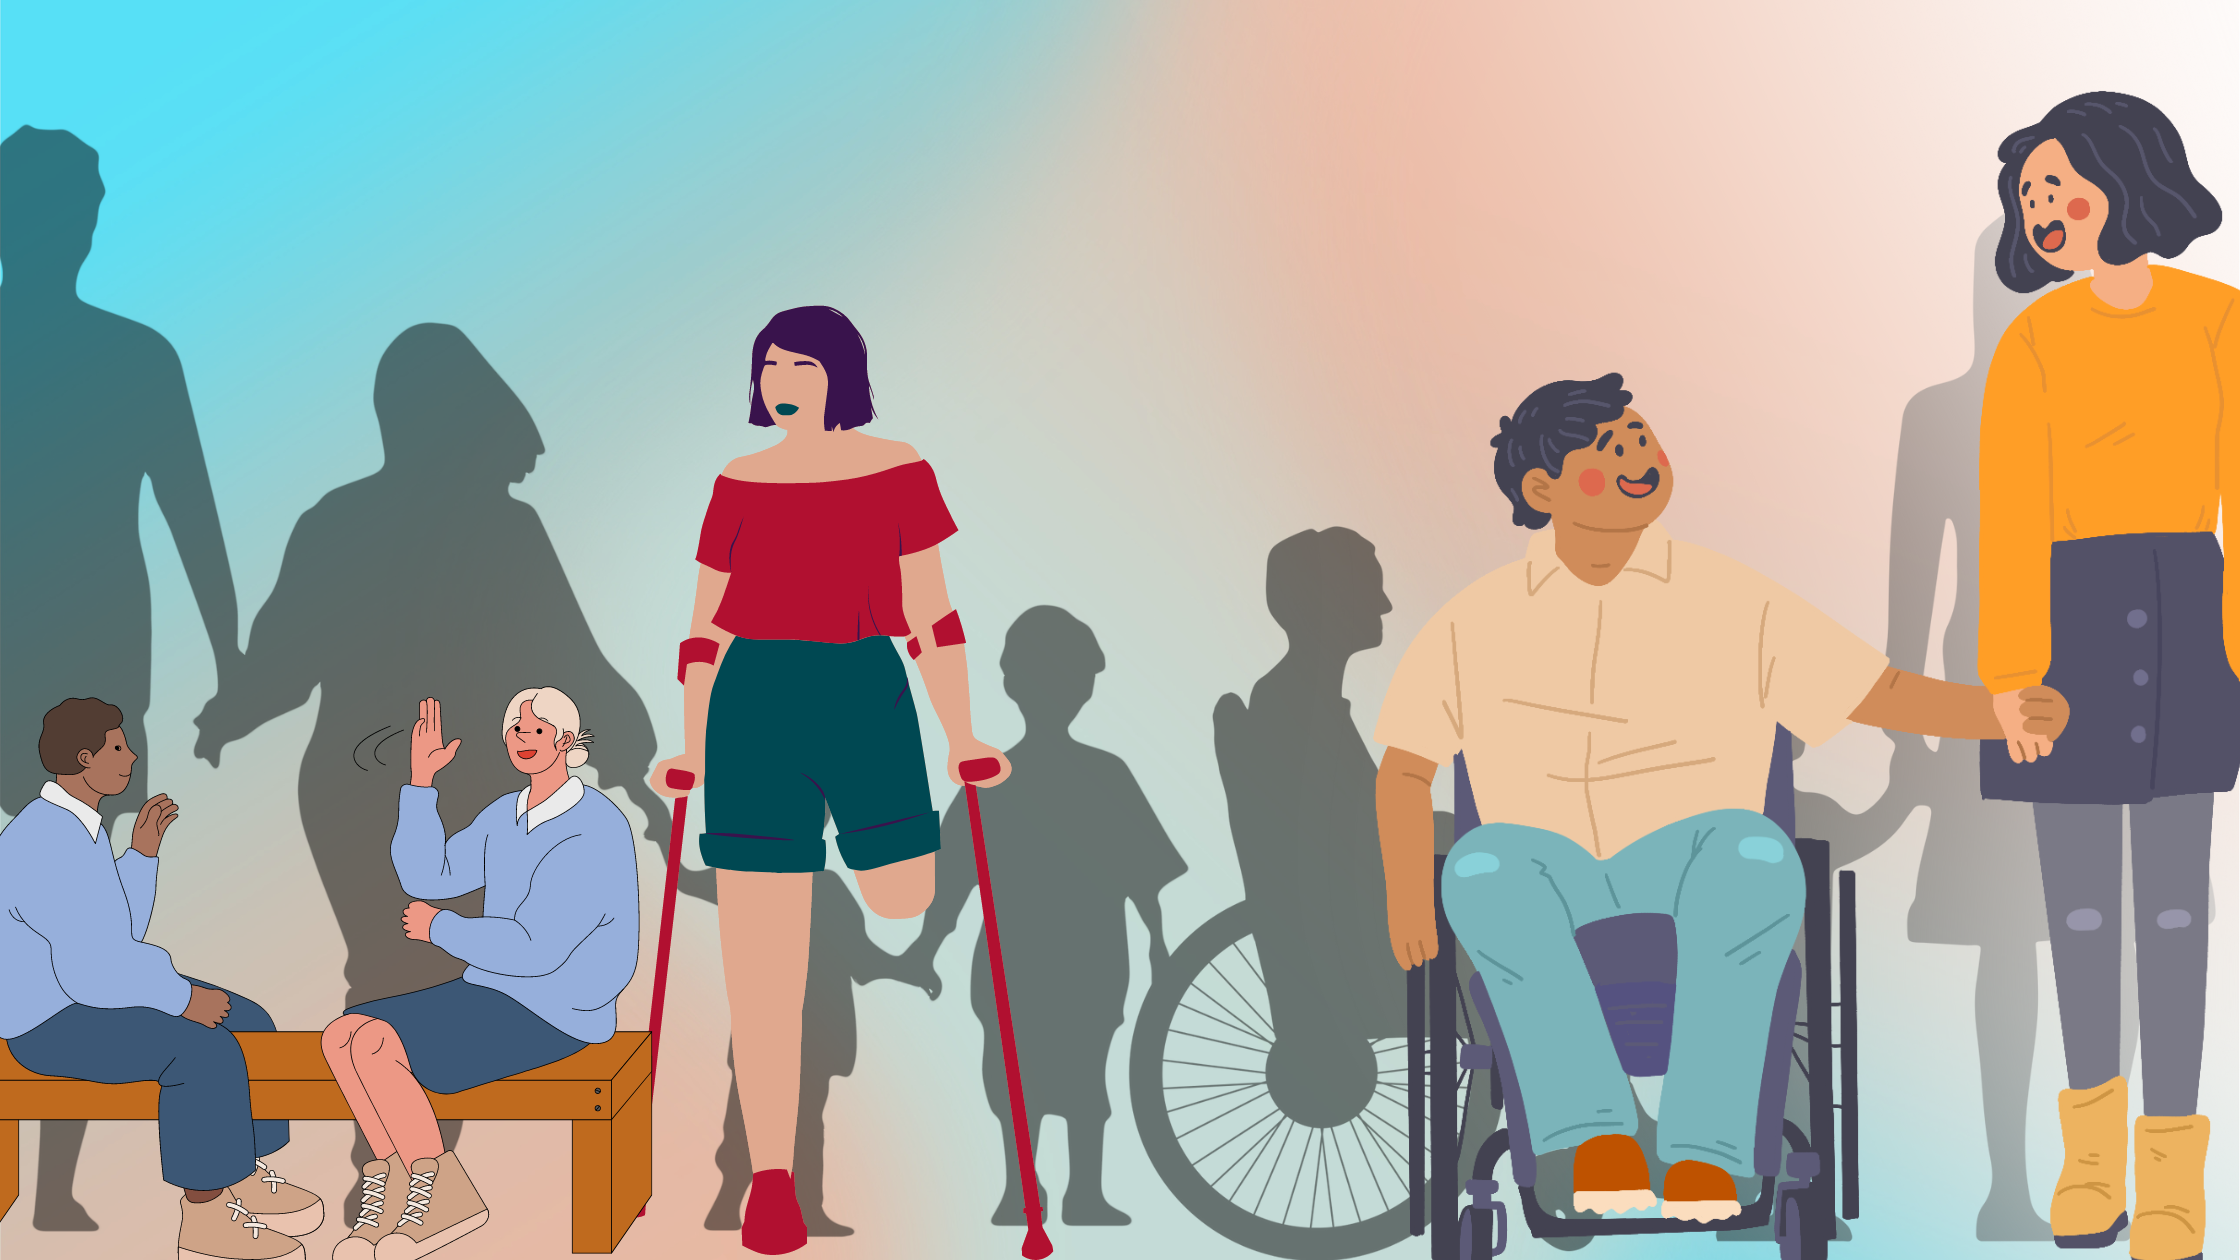 silhouette line of individuals with varying disabilities holding hands. In front of the line, colorful images of: two individuals sitting and conversing in ASL, a female presenting individual with a limb difference, and a female presenting individual standing talking to a masculine presenting individual who is using a wheelchair.